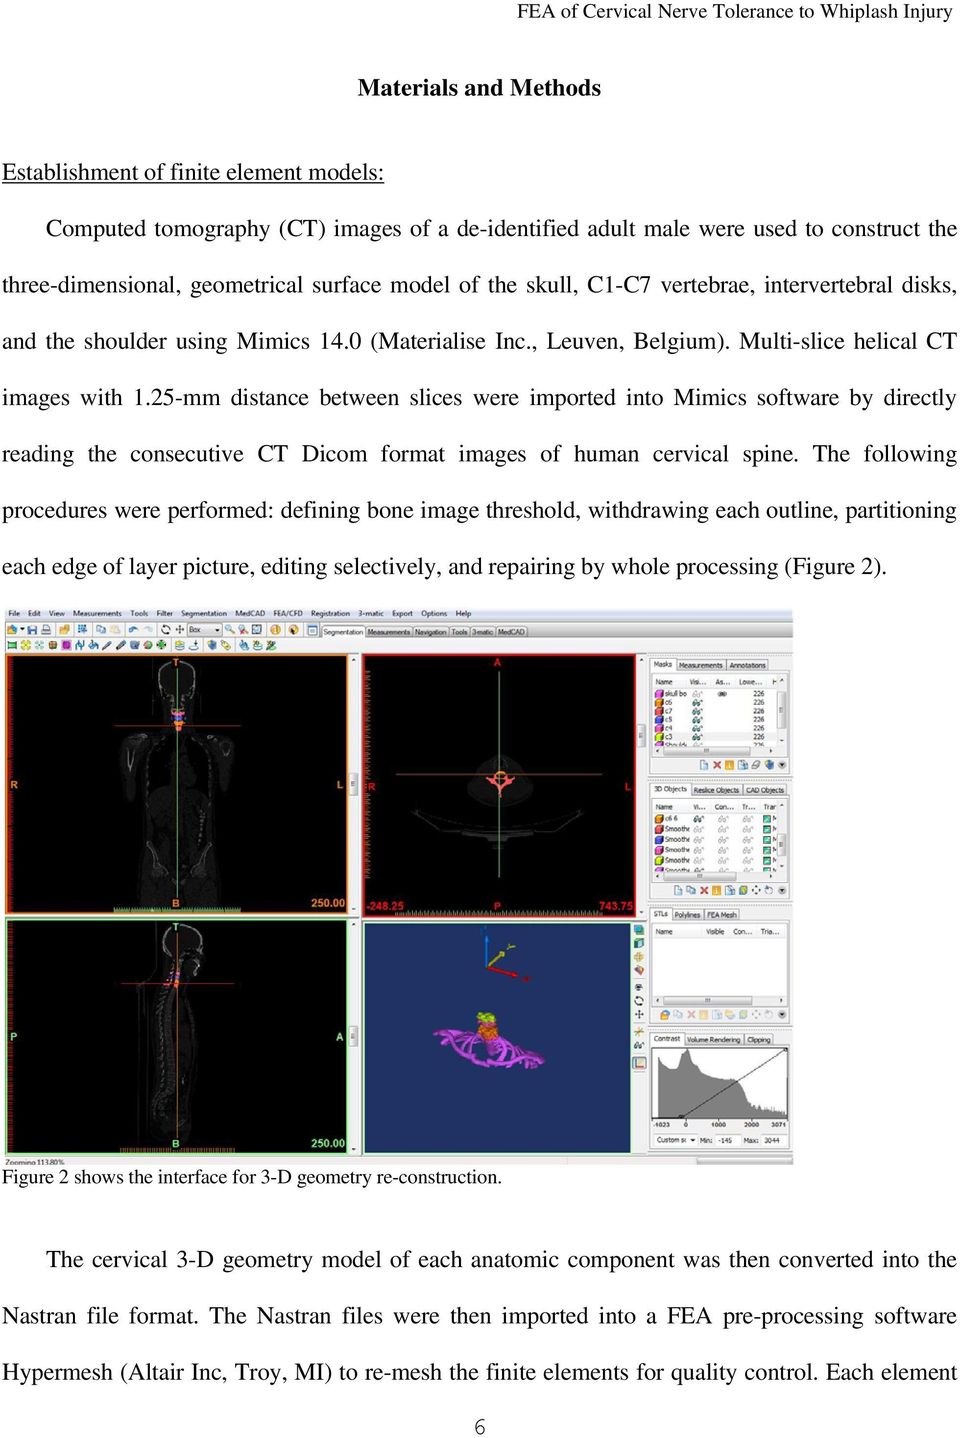 25-mm distance between slices were imported into Mimics software by directly reading the consecutive CT Dicom format images of human cervical spine.